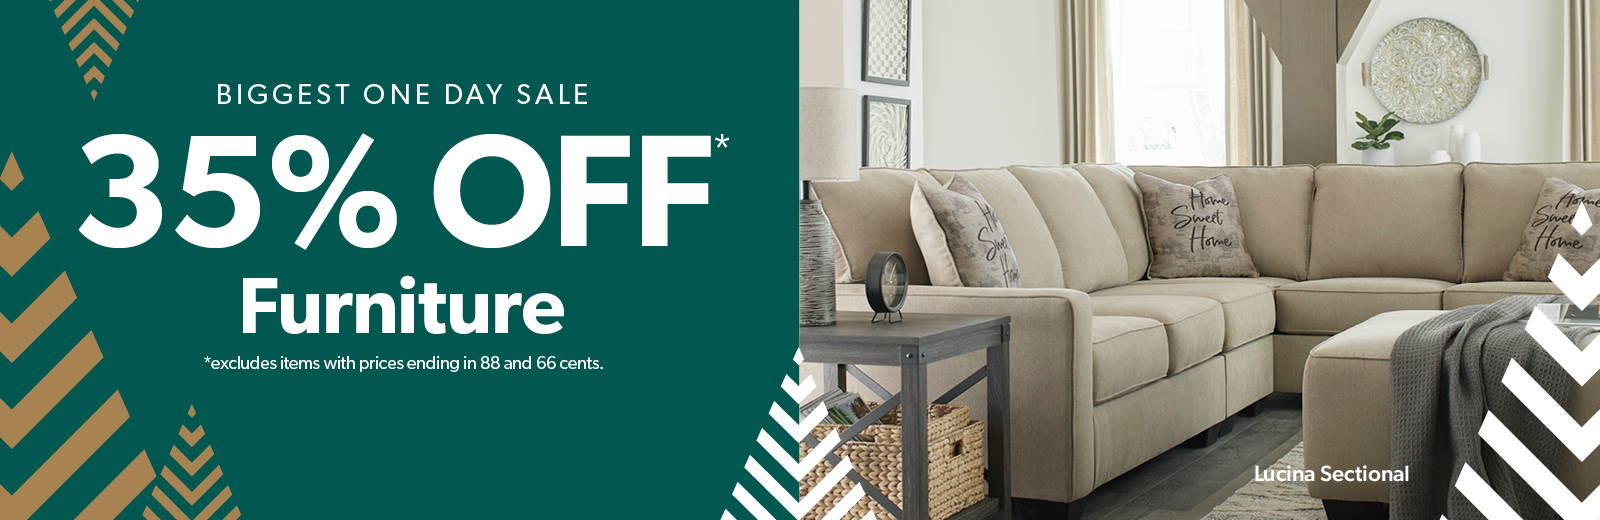 Biggest One Day Sale 35% OFF* Furniture *excludes items with prices ending in 88 and 66 cents